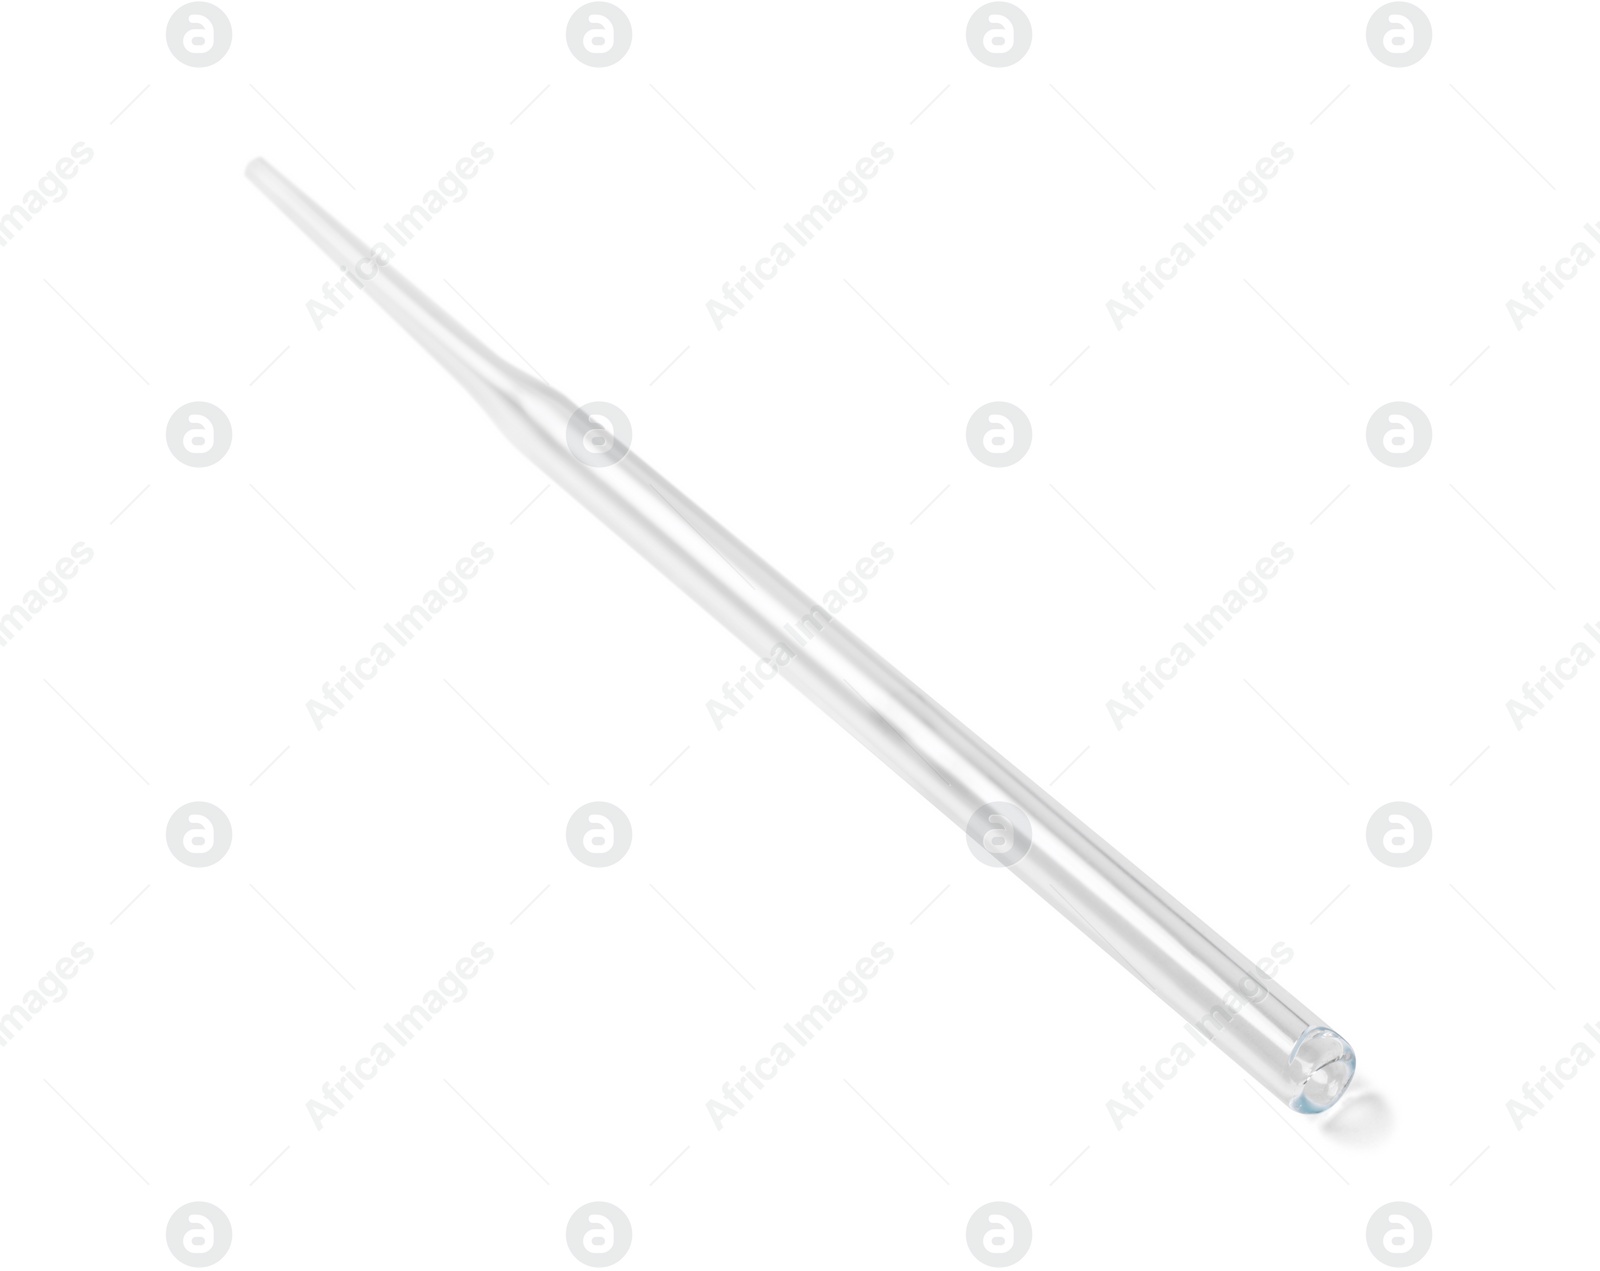 Photo of One glass measuring pipette isolated on white